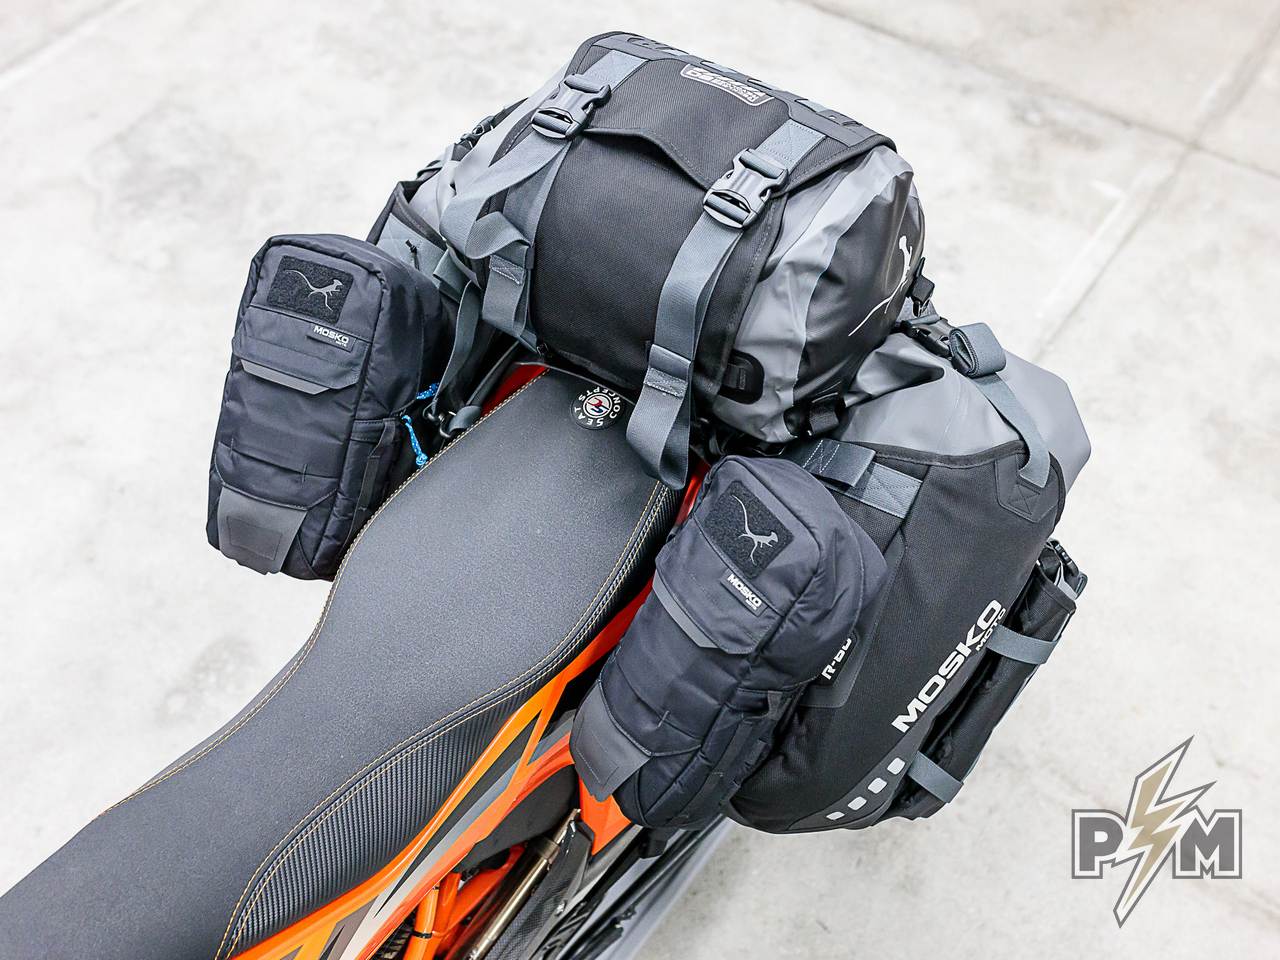 Perun moto KTM 690 Luggage rack, Extension plate and Heel guards with Mosko moto Reckless R80